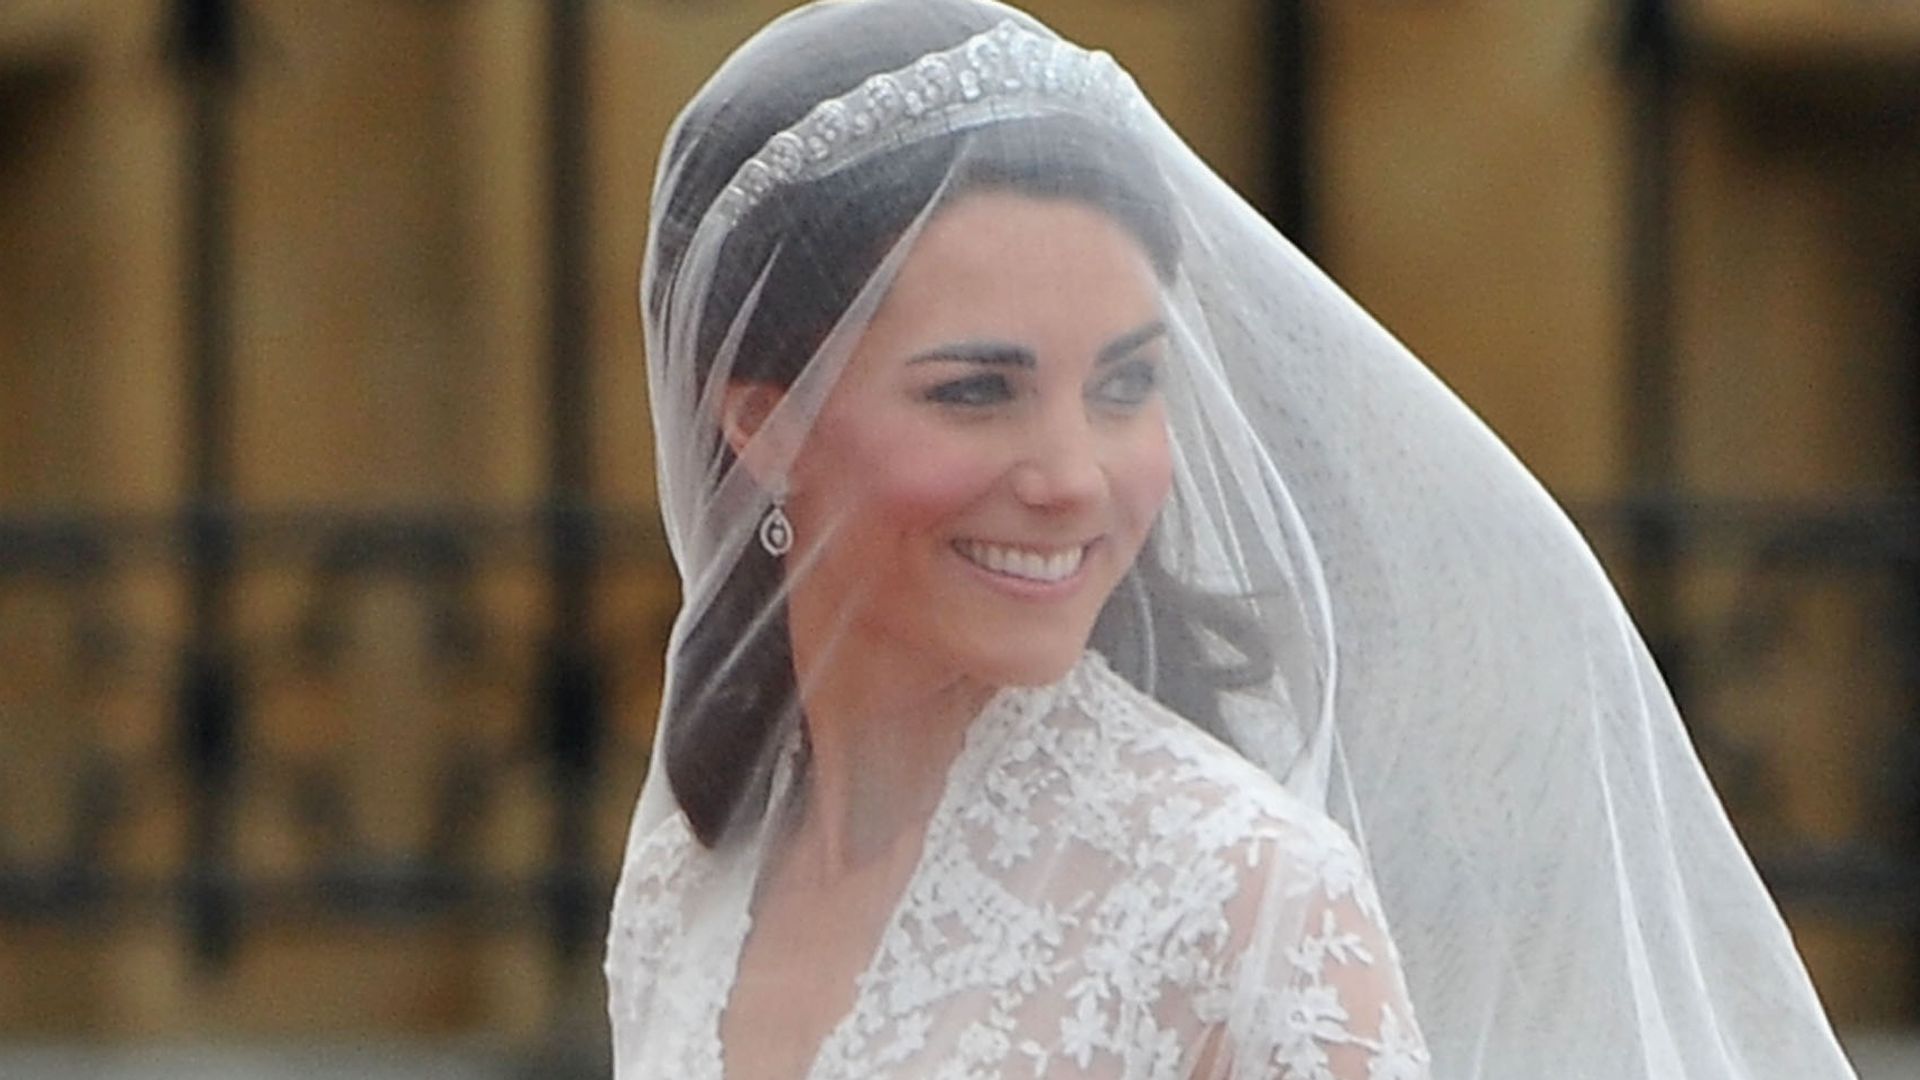 Kate Middleton wearing a veil and a wedding dress looking over her shoulders